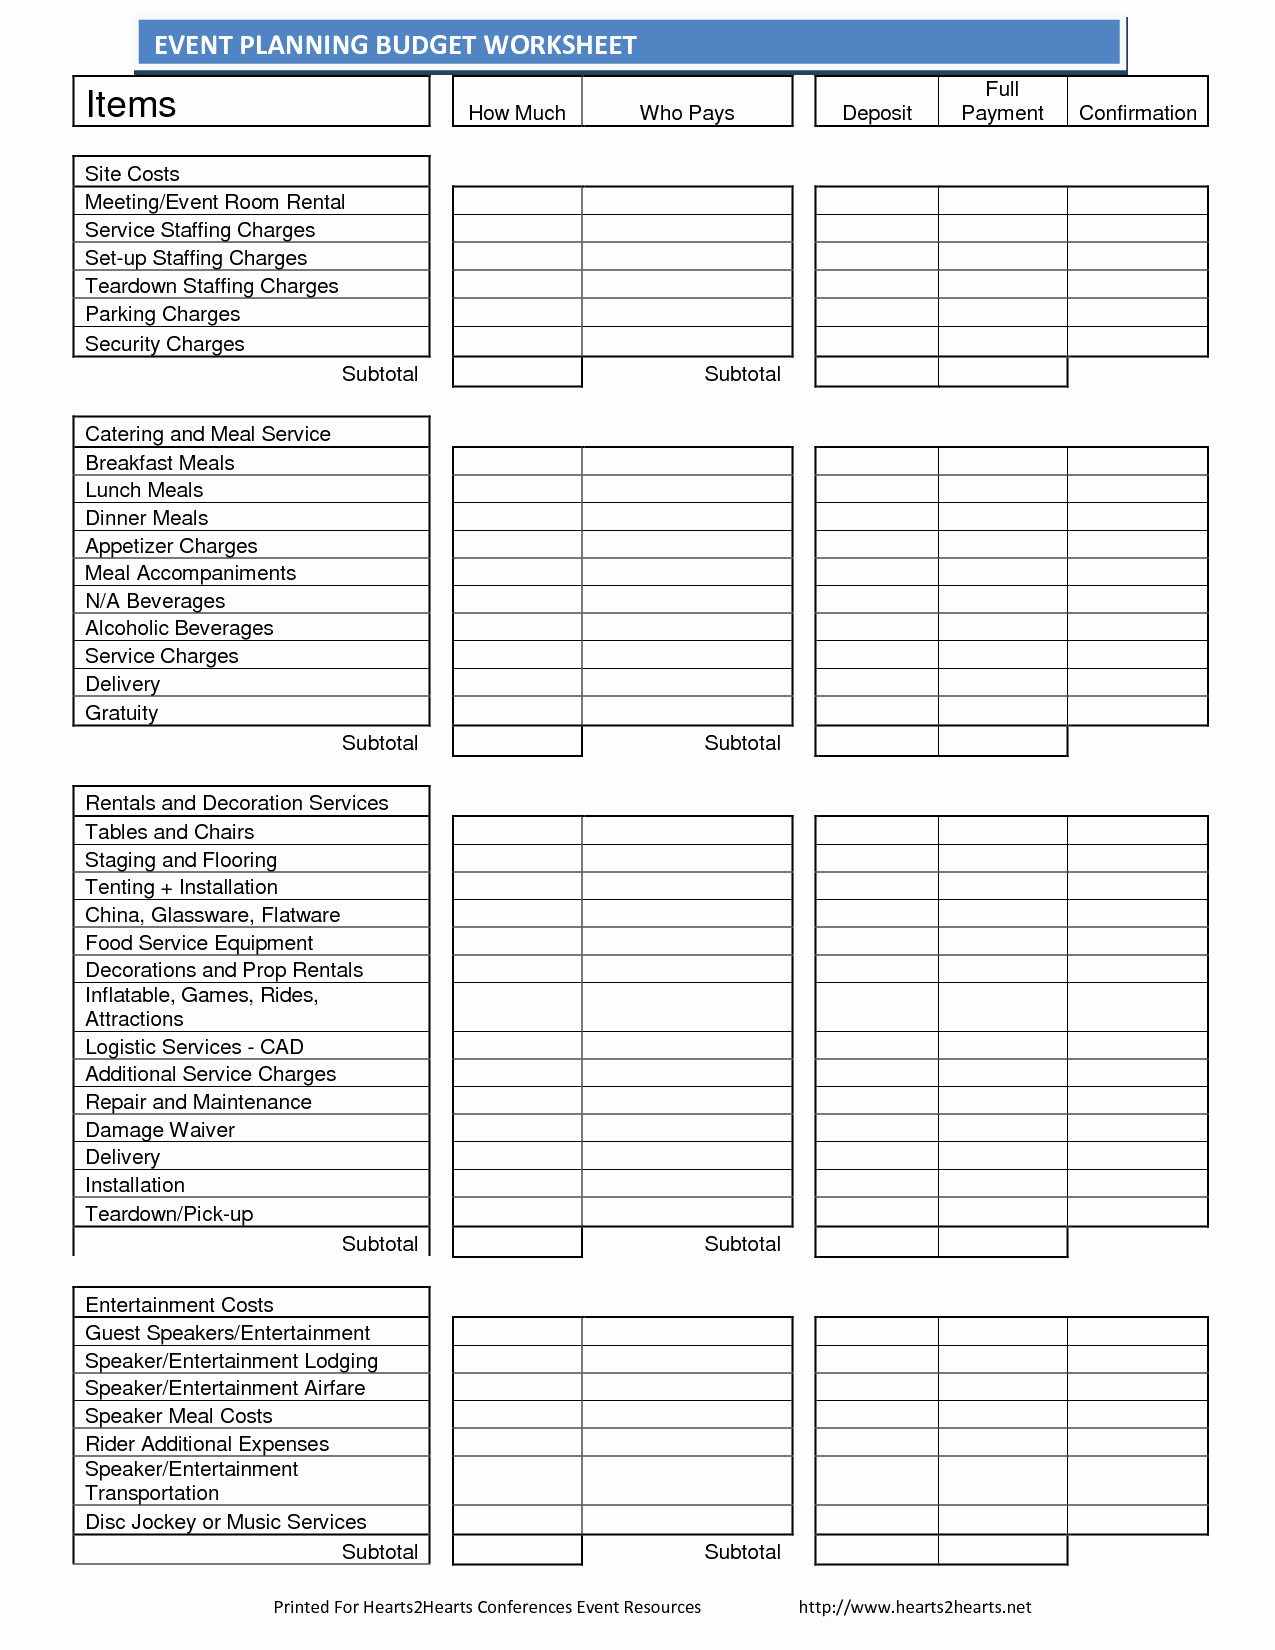 Event Planning Worksheet Template Best Of Bud Worksheet Template for events Google Search